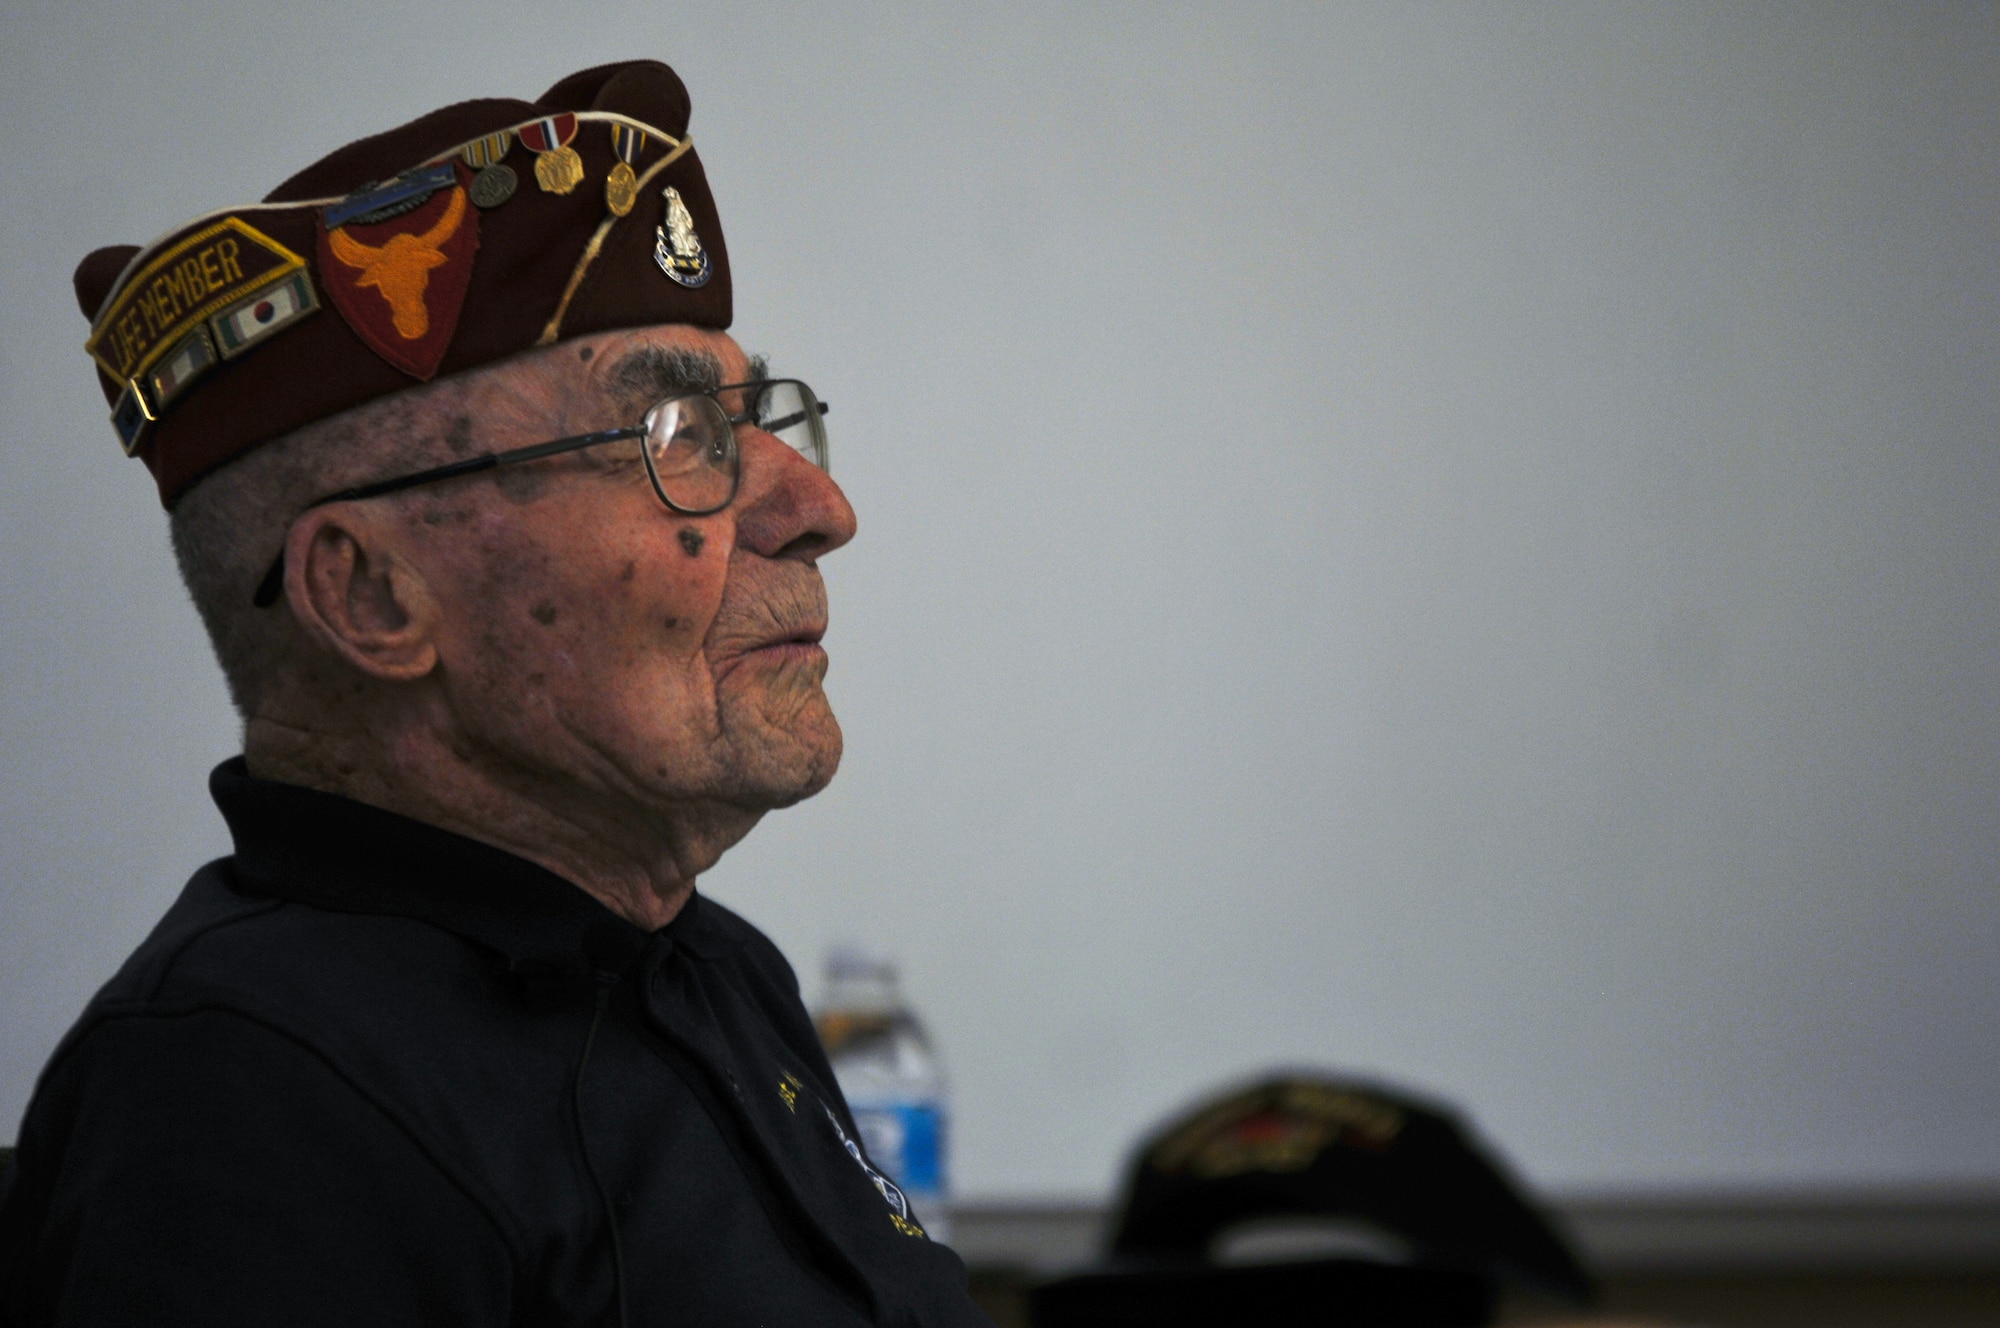 Paul Kerchum, a Chief Master Sgt. (Ret.) with the Air Force and the Army Air Corps, recalls a moment while describing his experiences in World War II and his survival of the Bataan Death March at White Sands Missile Range, New Mexico, March 24, 2018.